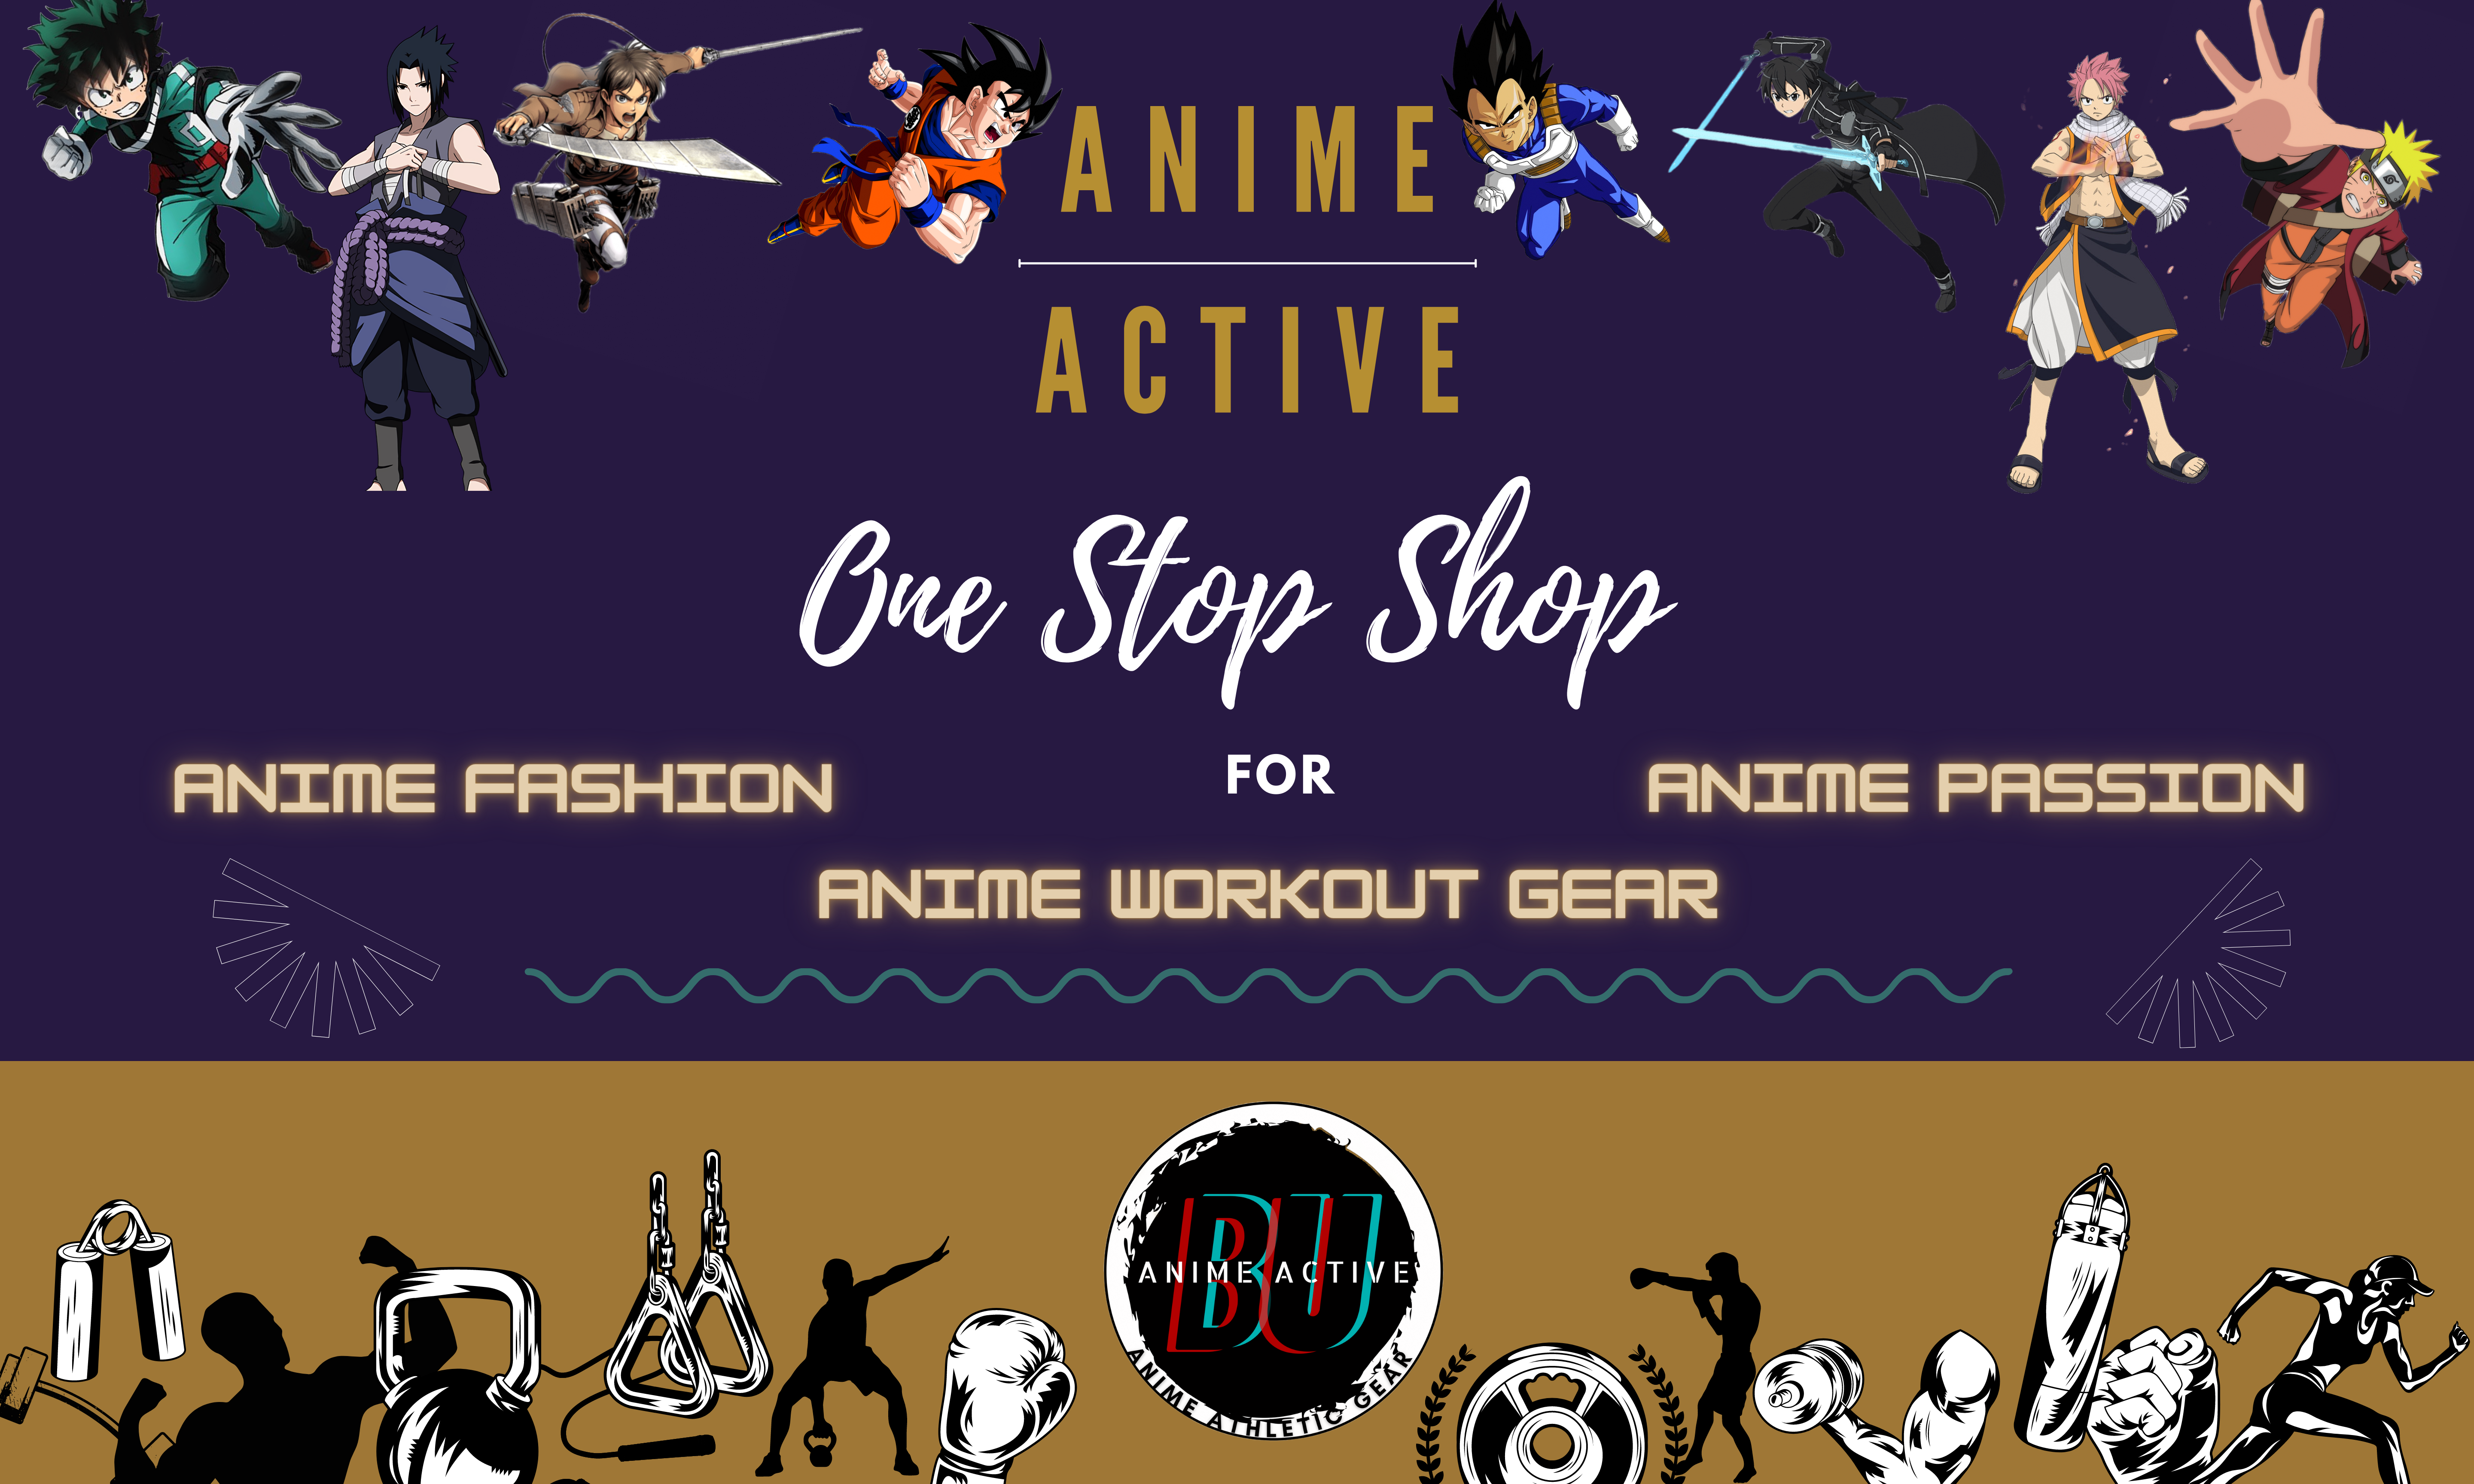 Anime Workout Clothes - Animation Specialist - Anime worlds | LinkedIn